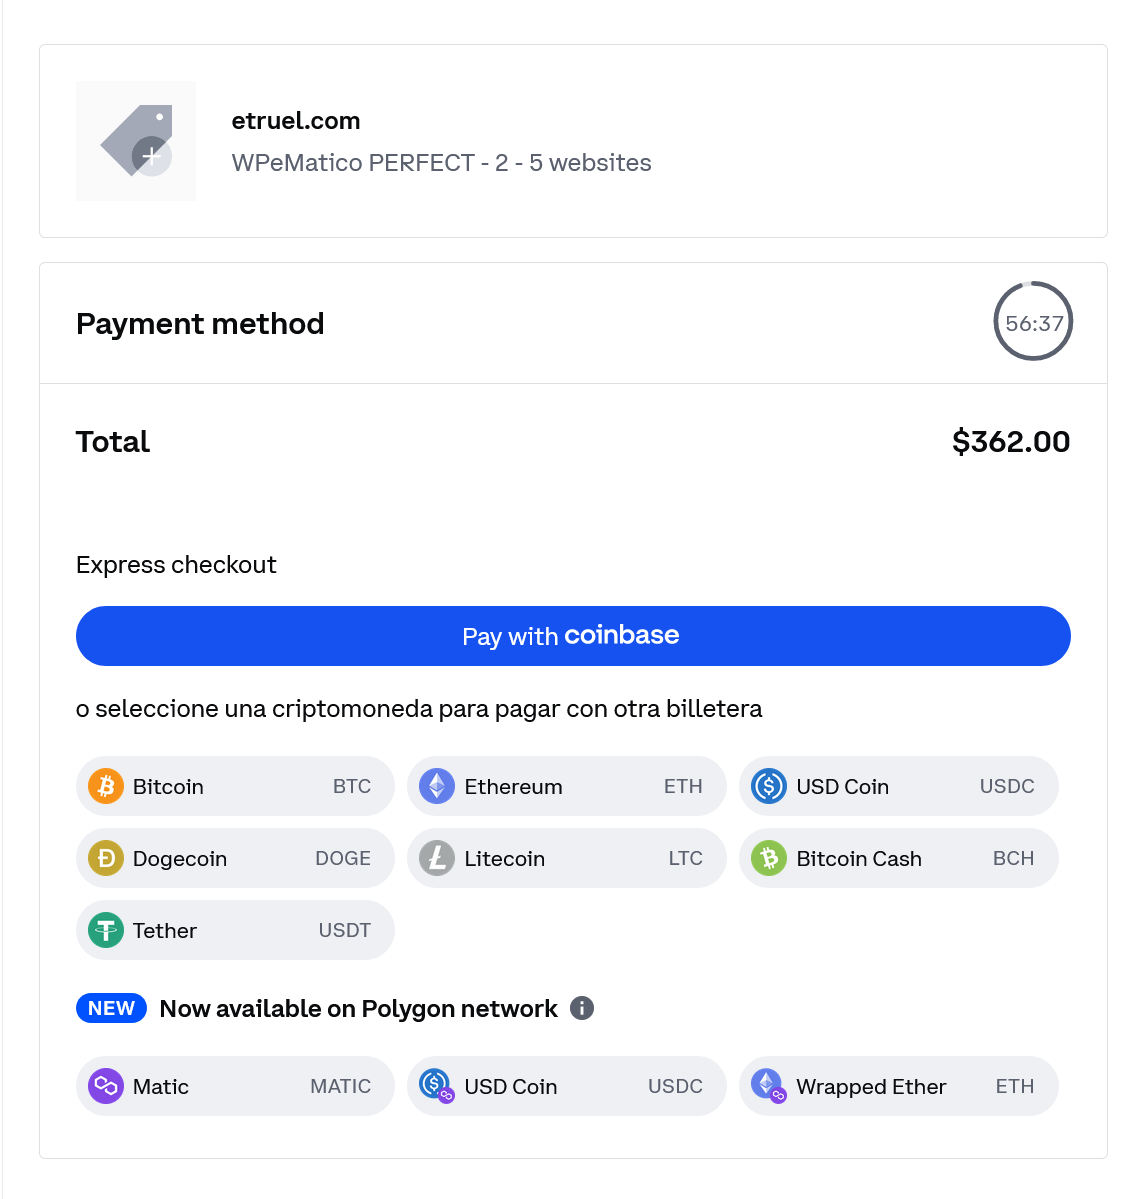 How to Checkout at etruel.com - coinbase payment checkout